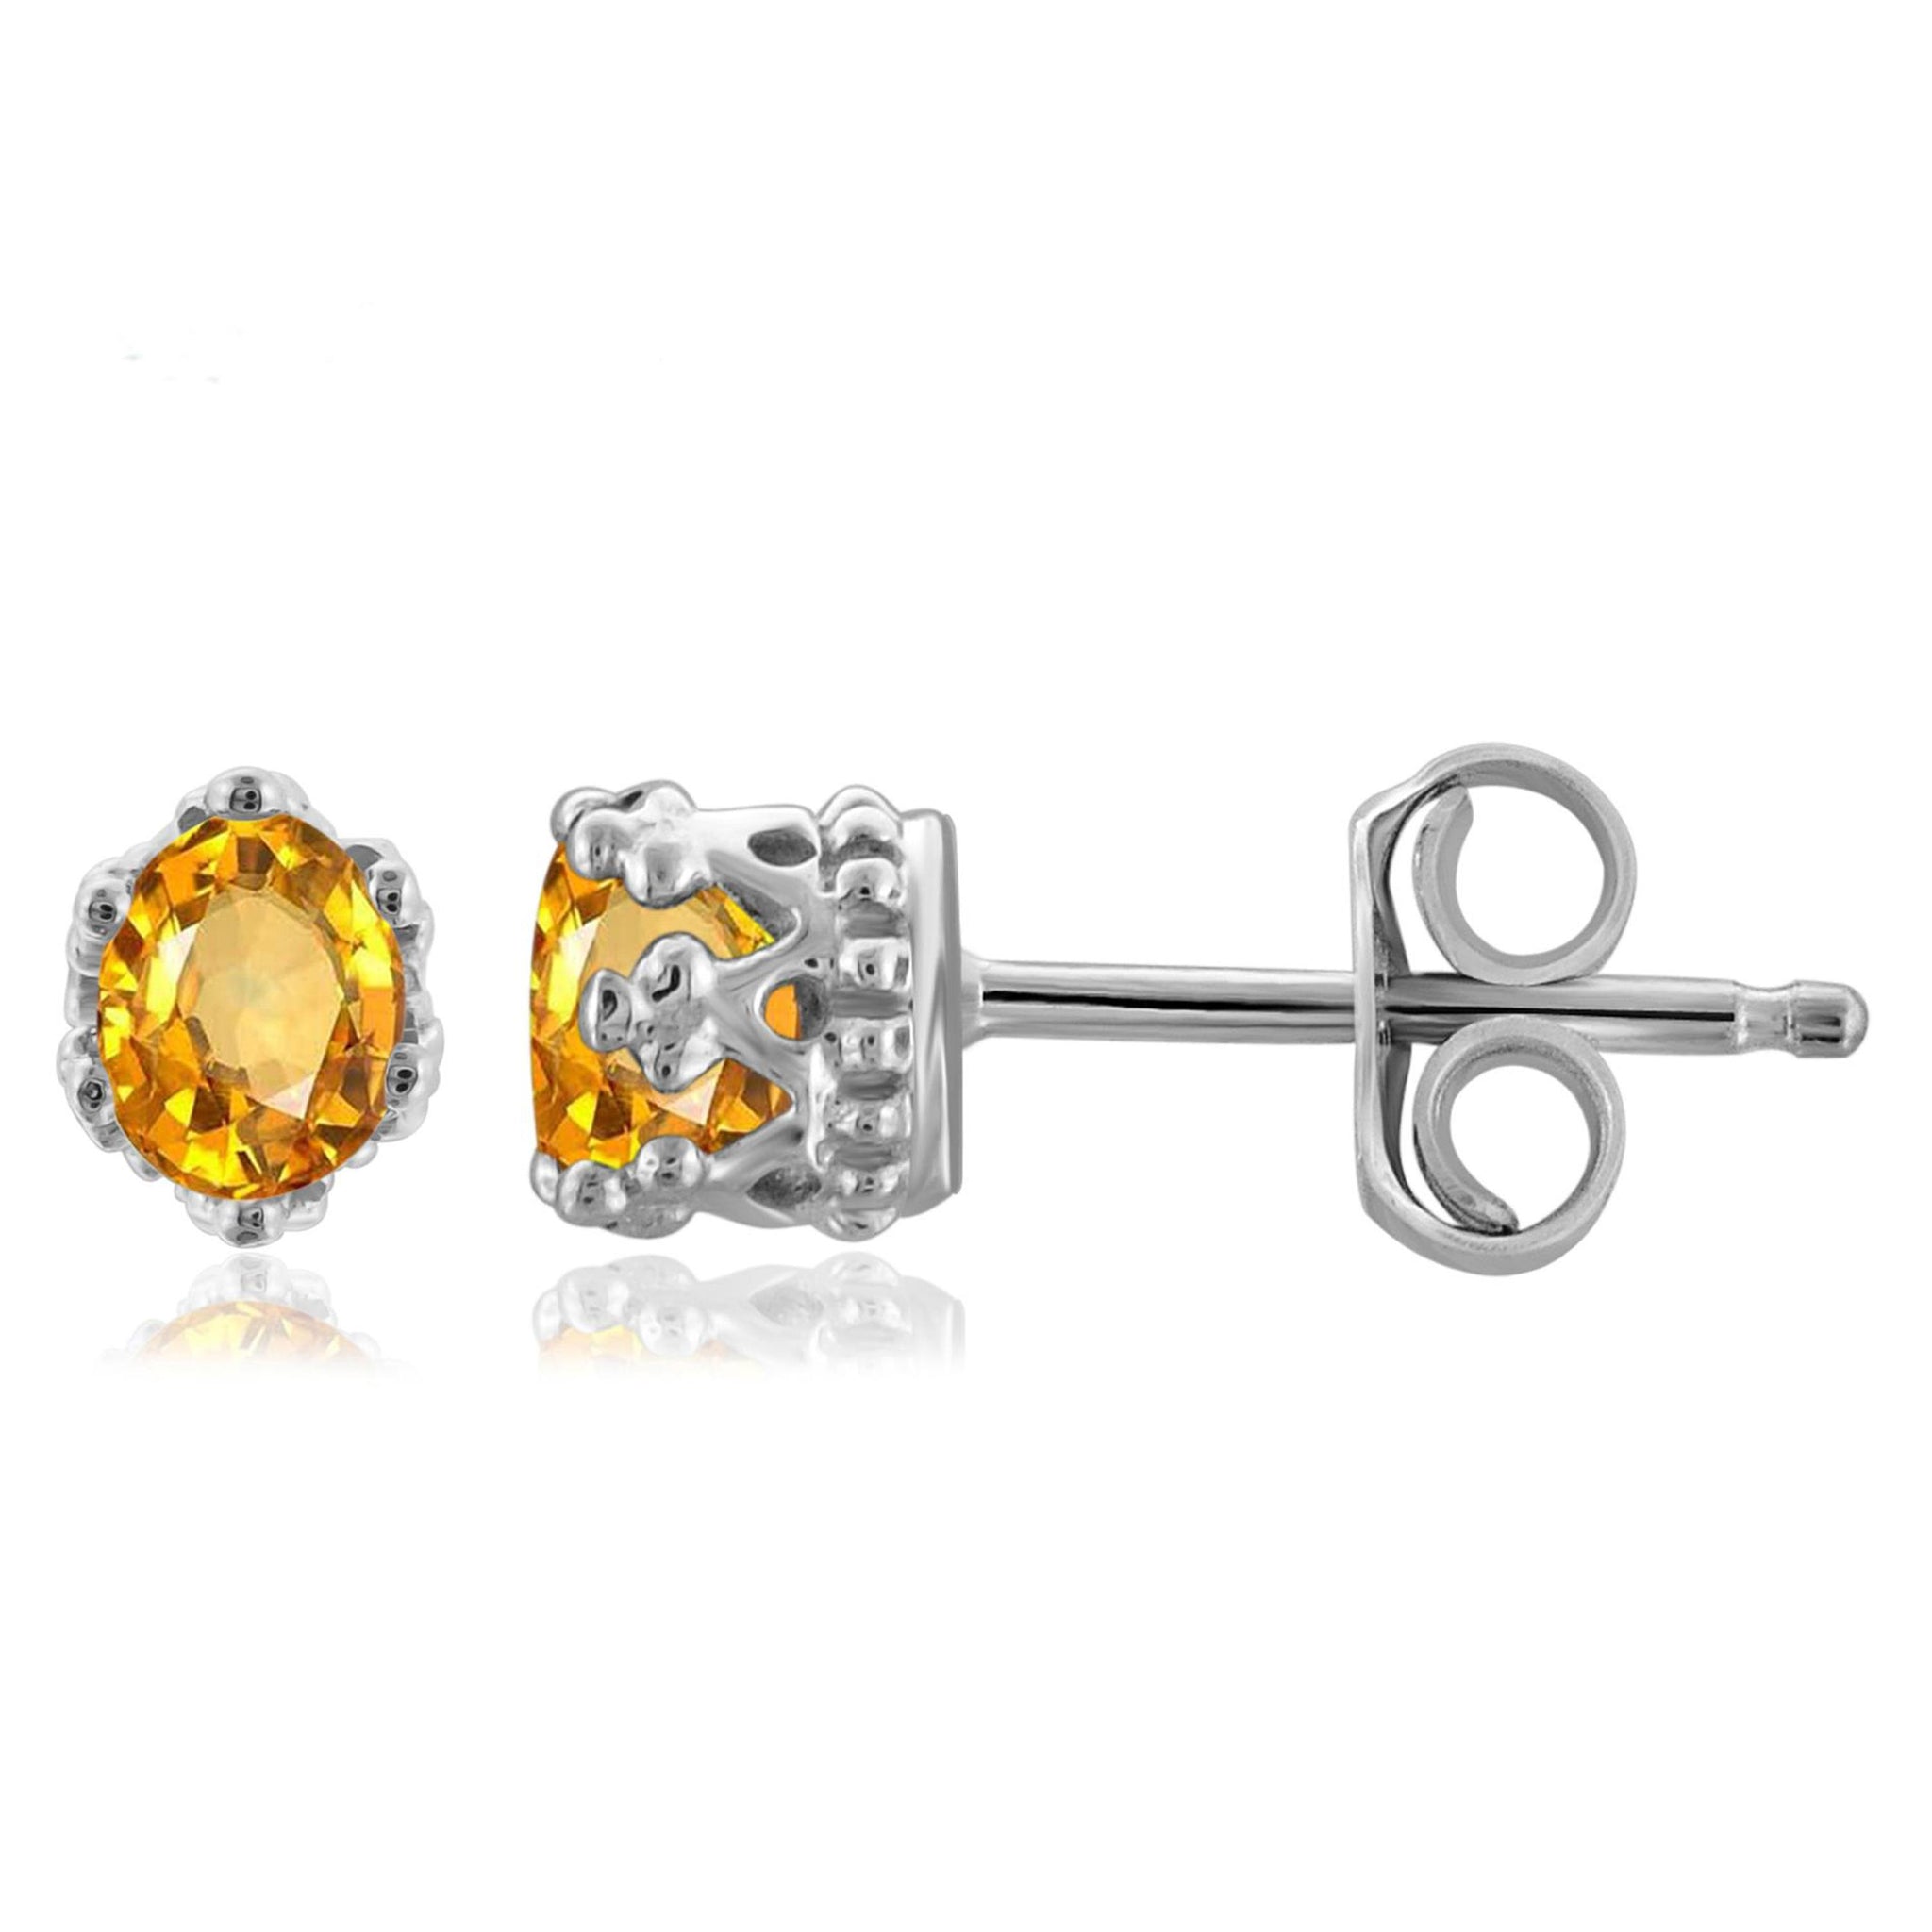 JewelonFire 1/3 Carat T.G.W. Citrine Sterling Silver Stud Earrings - Assorted Colors